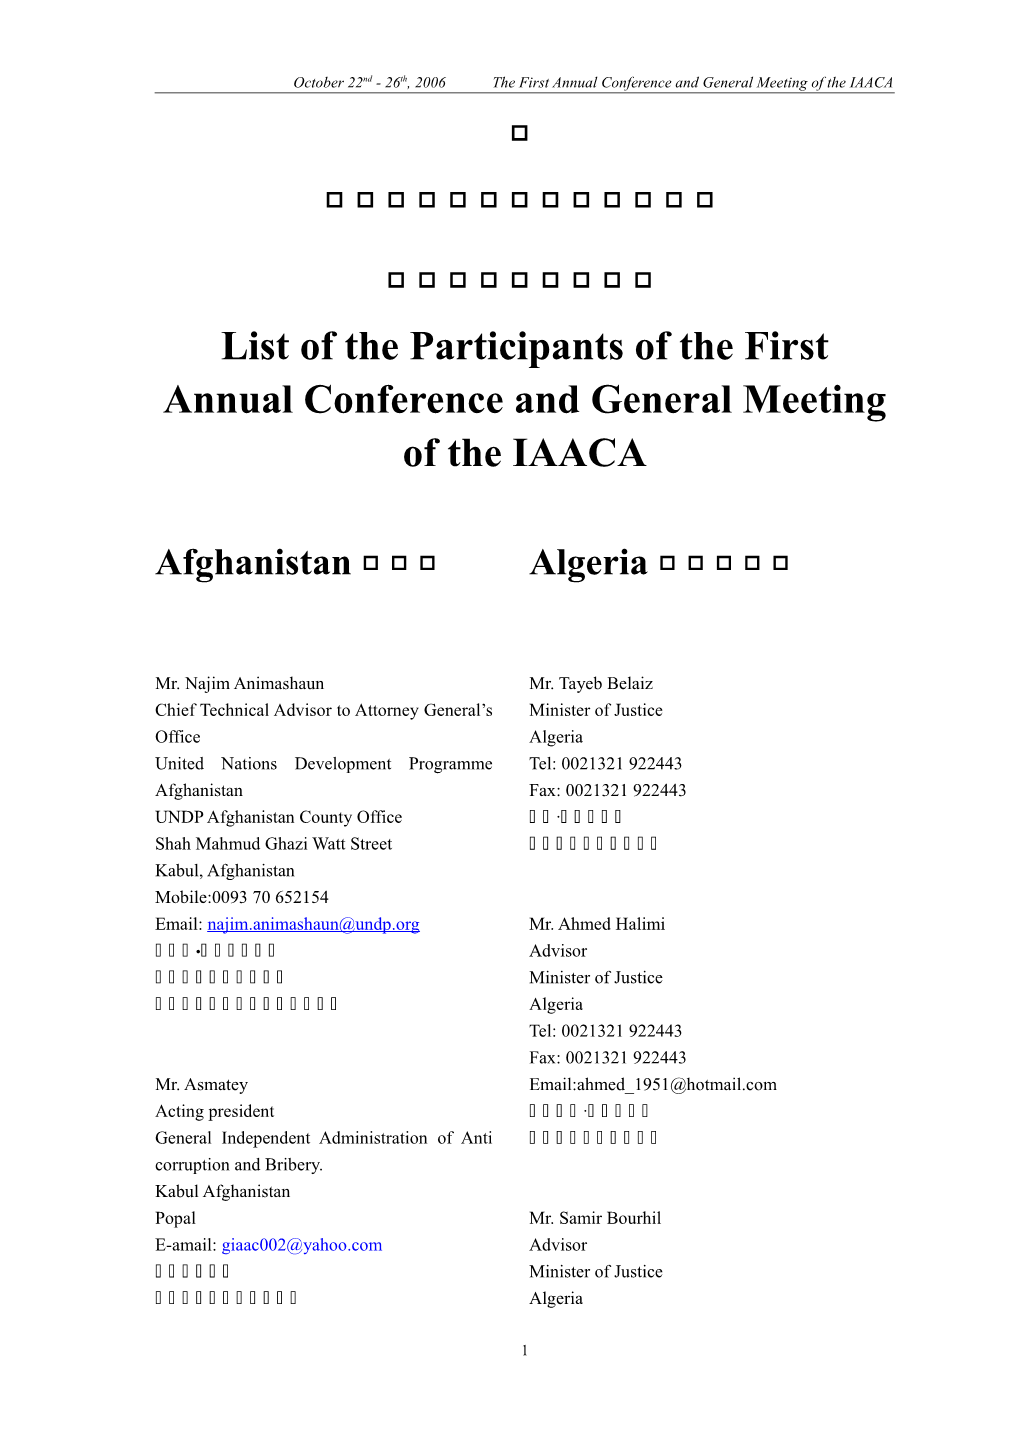 List of the Participants of the First Annual Conference and General Meeting of the IAACA